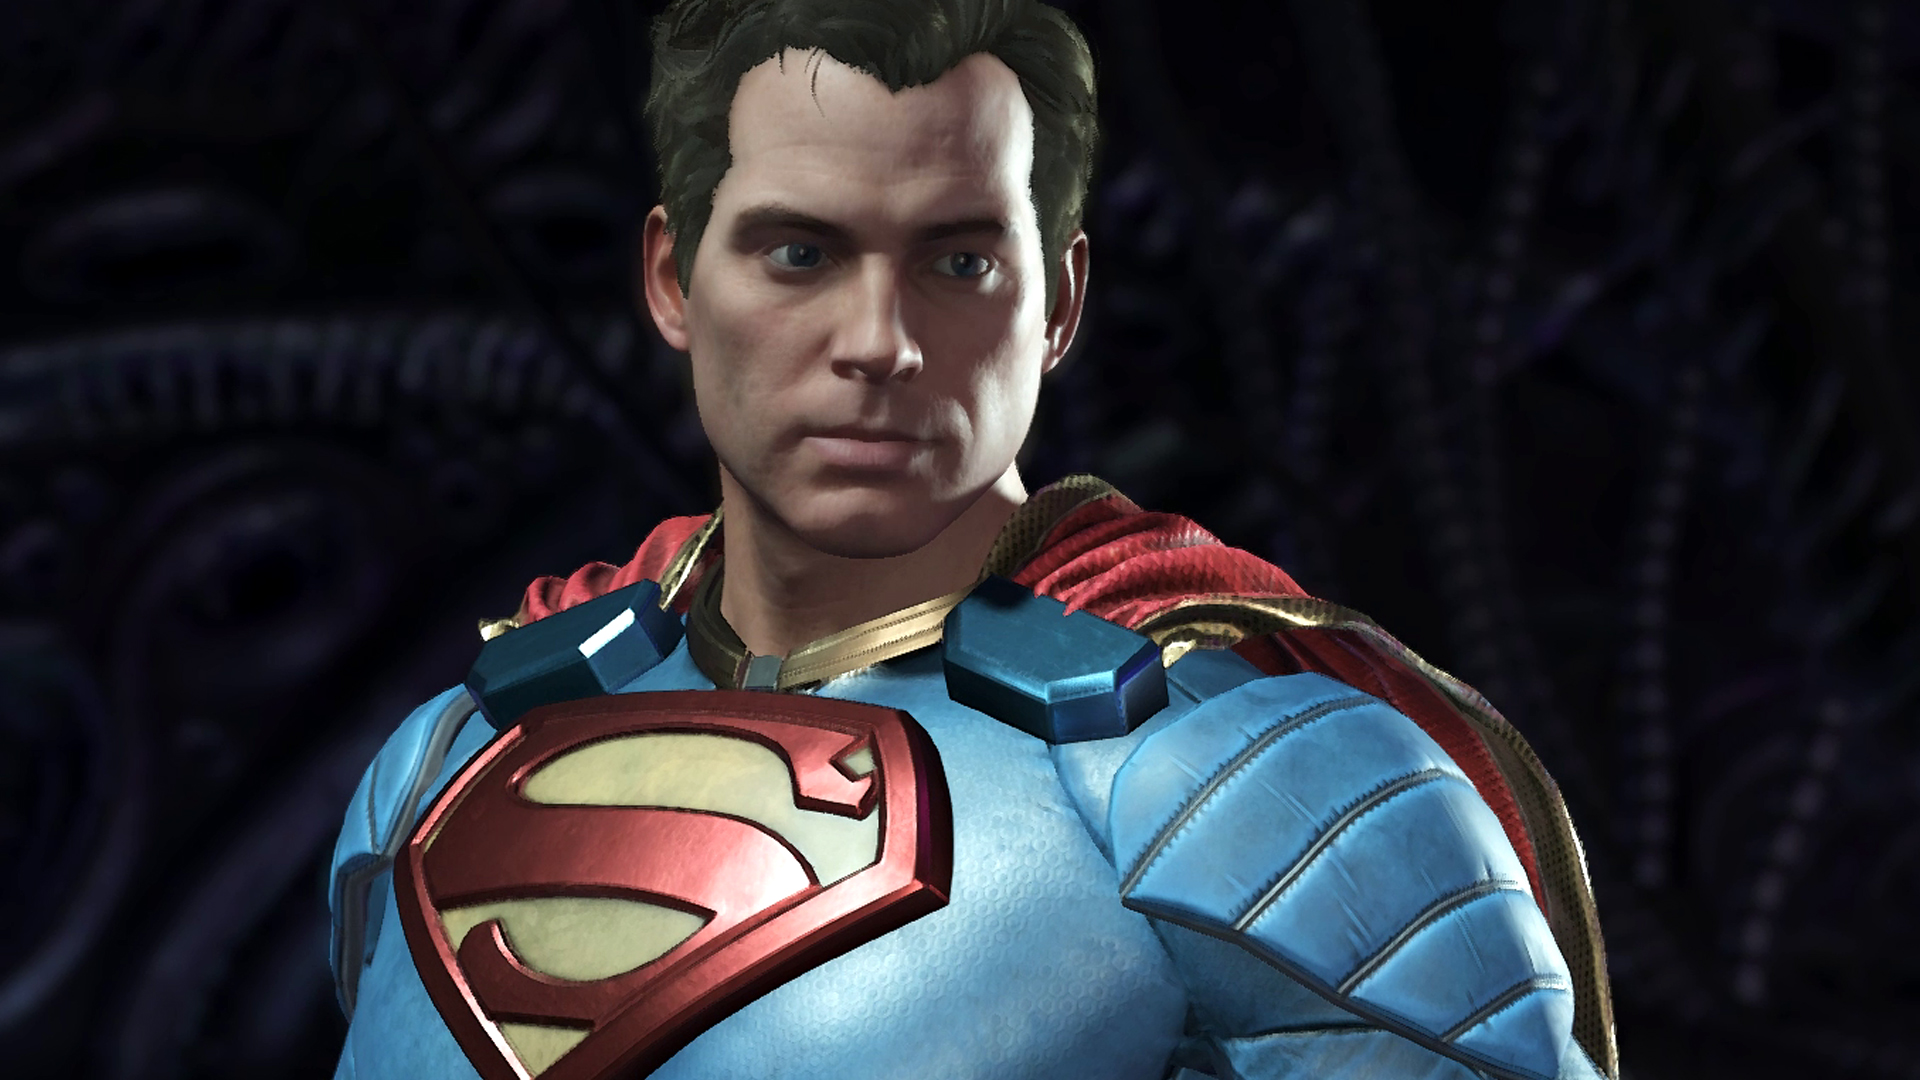 You can play as Superman in The Matrix Unreal 5 demo | PCGamesN